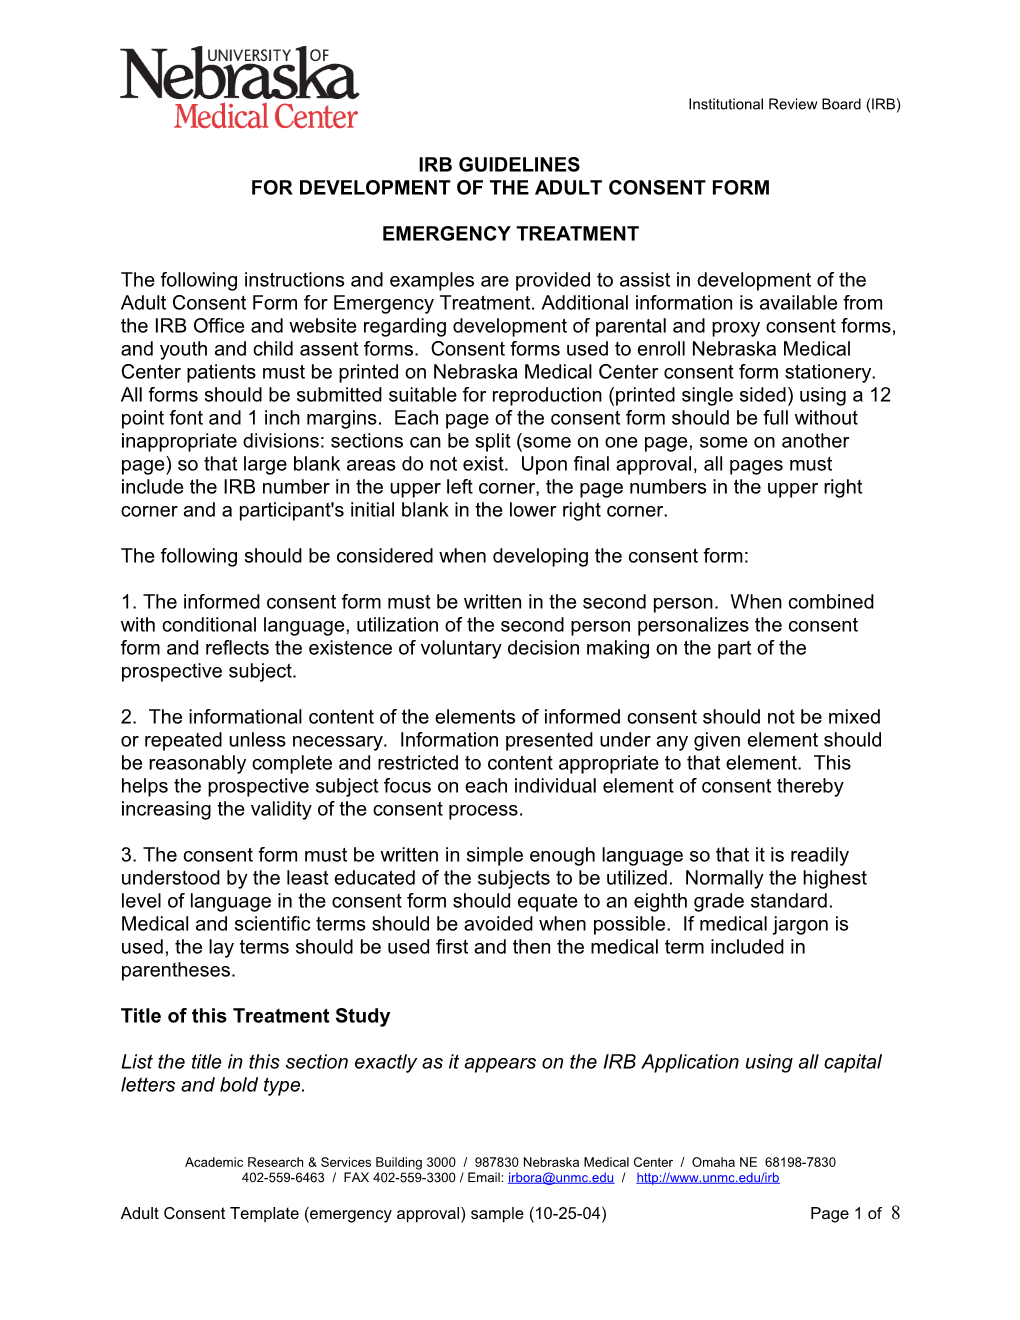 For Development of the Adult Consent Form